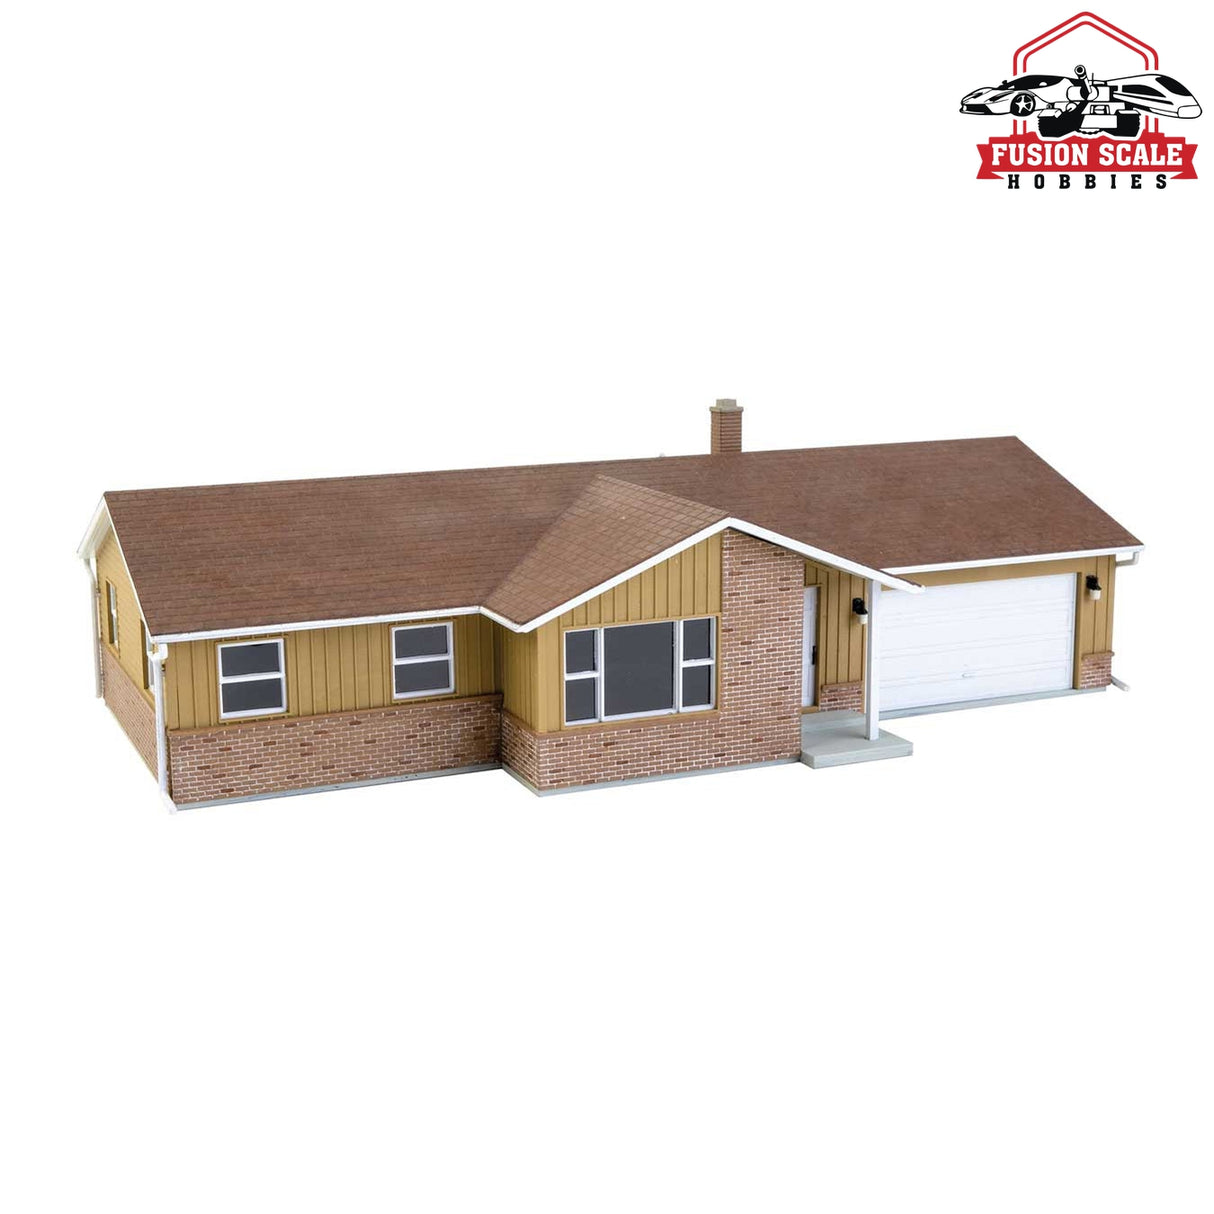 Walthers Cornerstone HO Scale Ranch House with Attached 2Car Garage Kit 4 x 21/4 x 11/2" 10.1 x 5.7 x 3.8cm